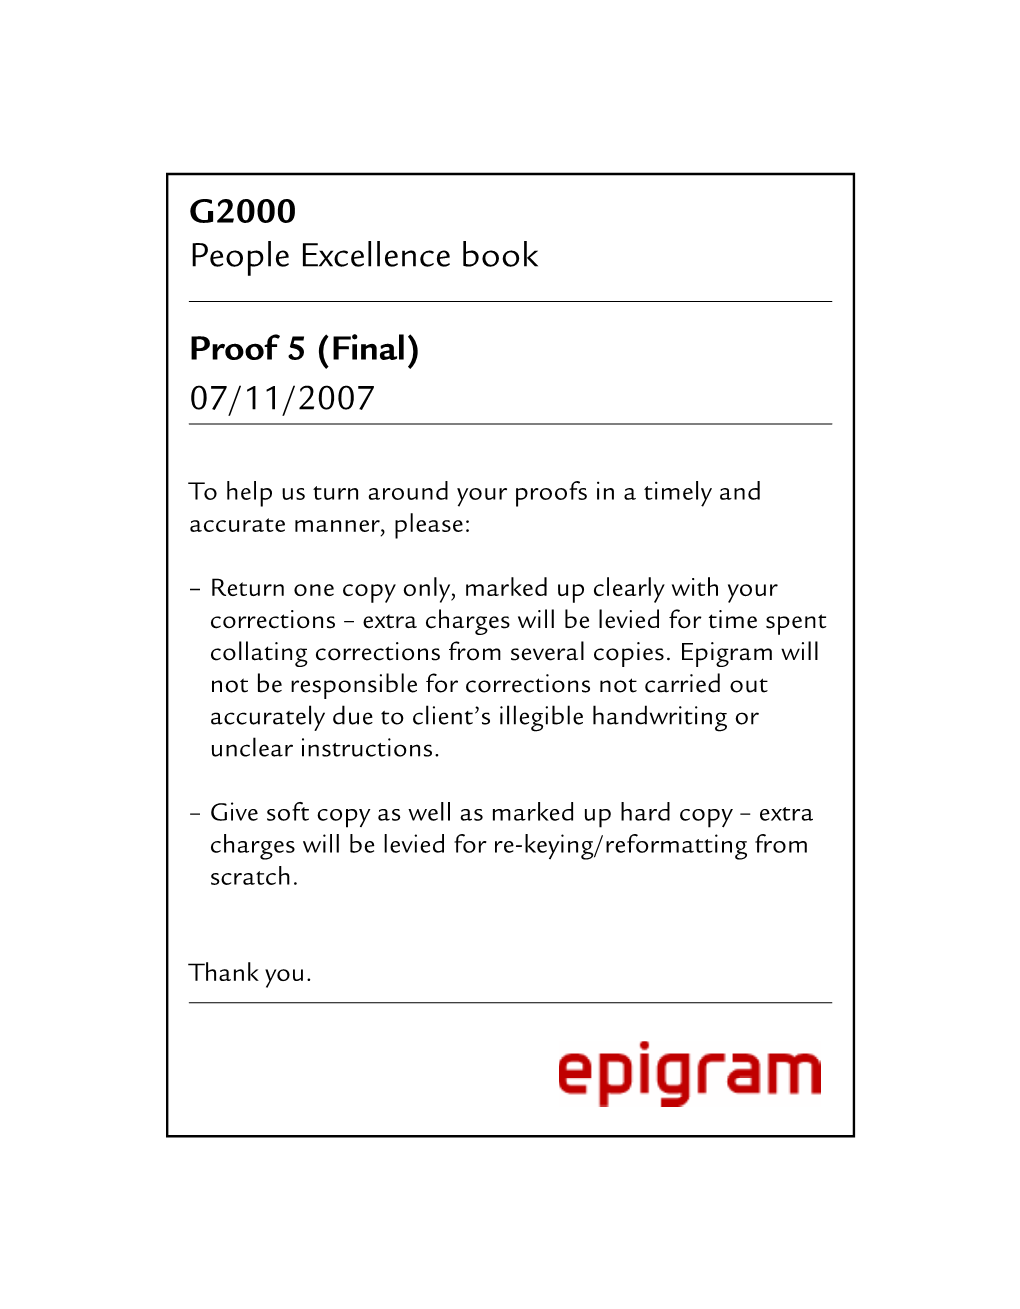 G2000 People Excellence Book Proof 5 (Final) 07/11/2007